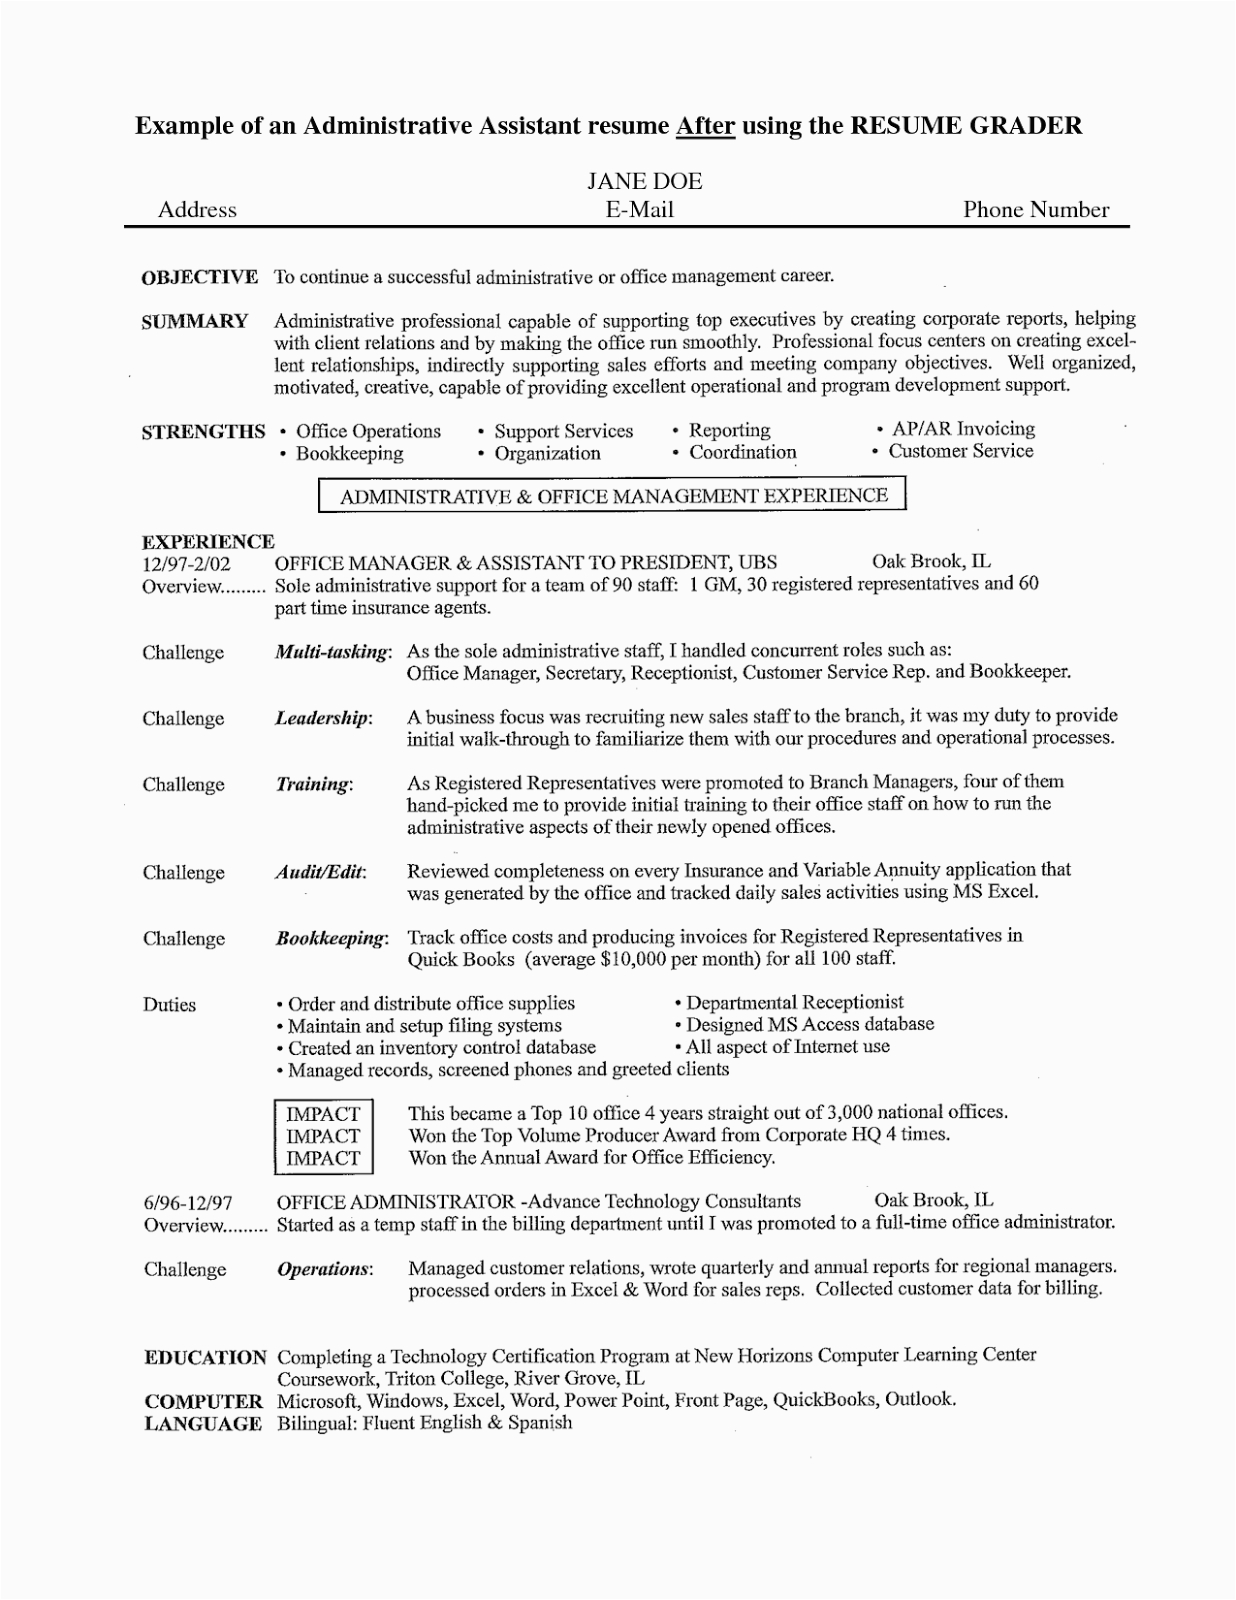 Administrative assistant Resume Objective Statement Samples Sample Objective Resume for Administrative assistant